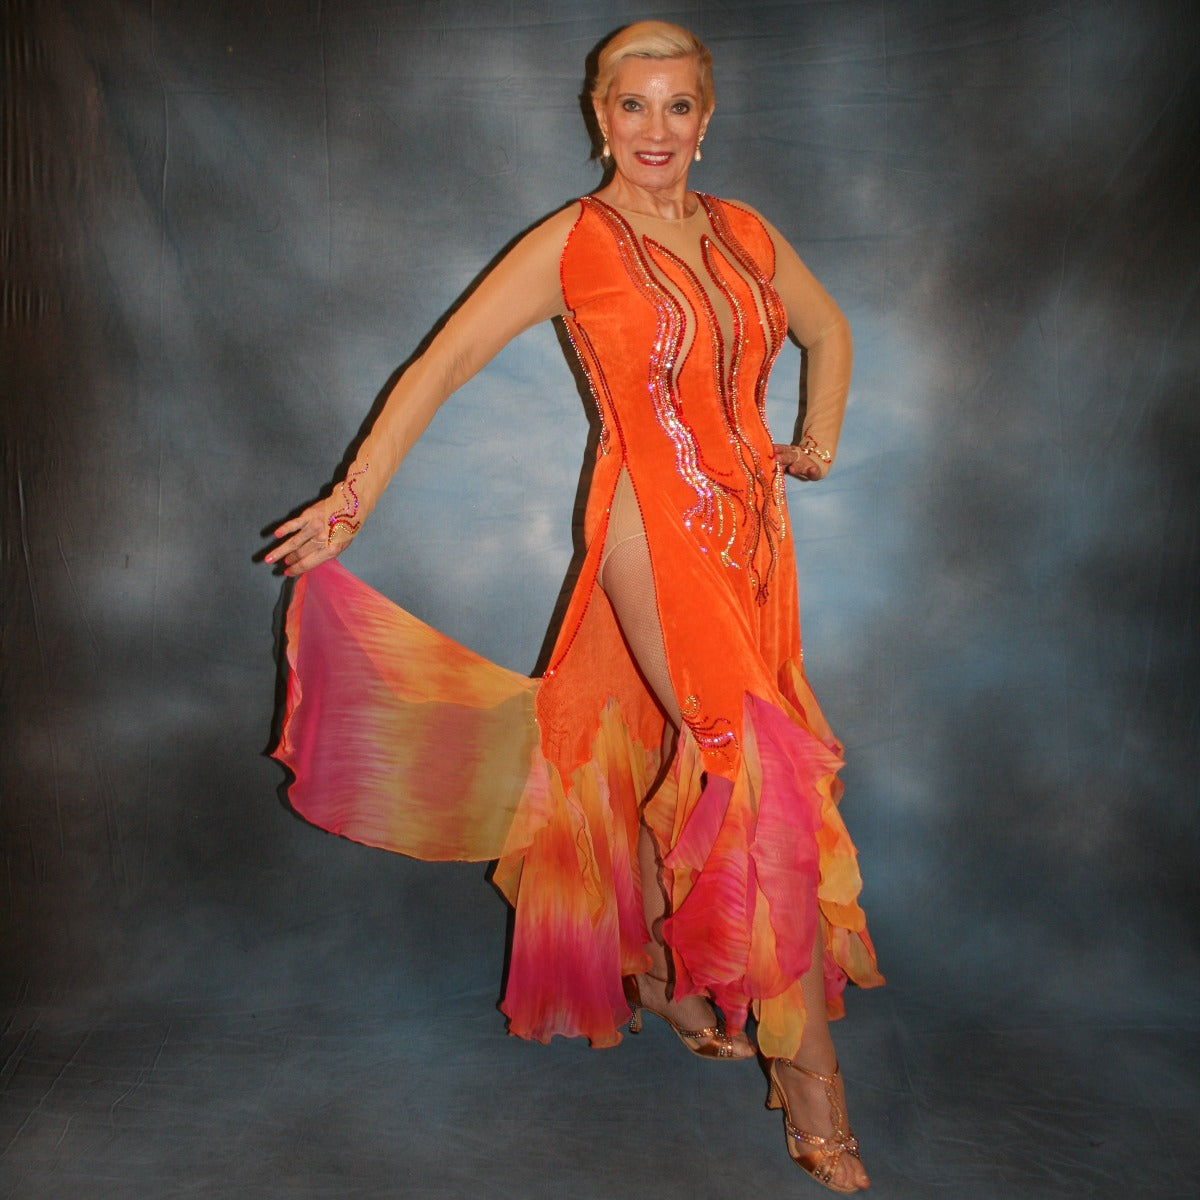 Crystal's Creations Sunny orange ballroom dress created in luxurious solid slinky with gorgeous printed chiffon in bursts of orange, pink & yellow, is embellished with Swarovski rhinestone work of orange hyacynth, rose, jonquil & fuschia. 